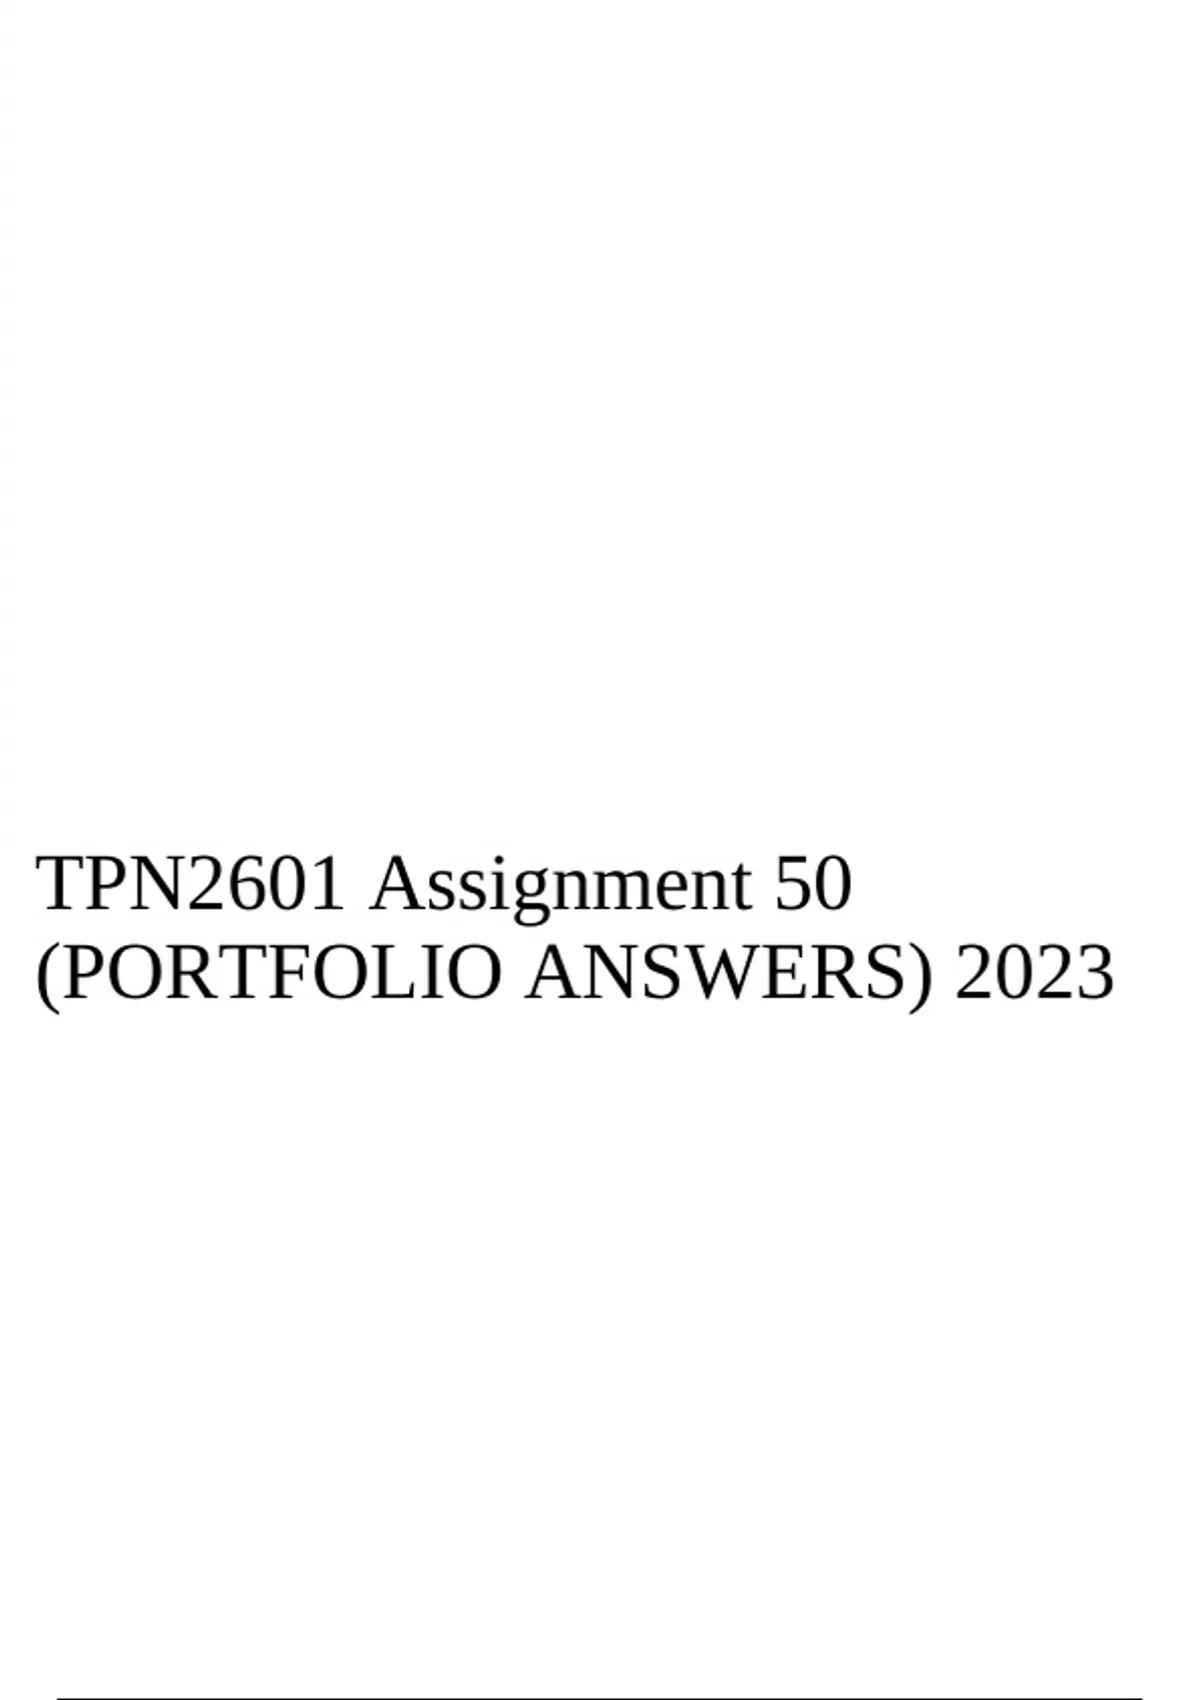 tpn2601 assignment 50 answers pdf